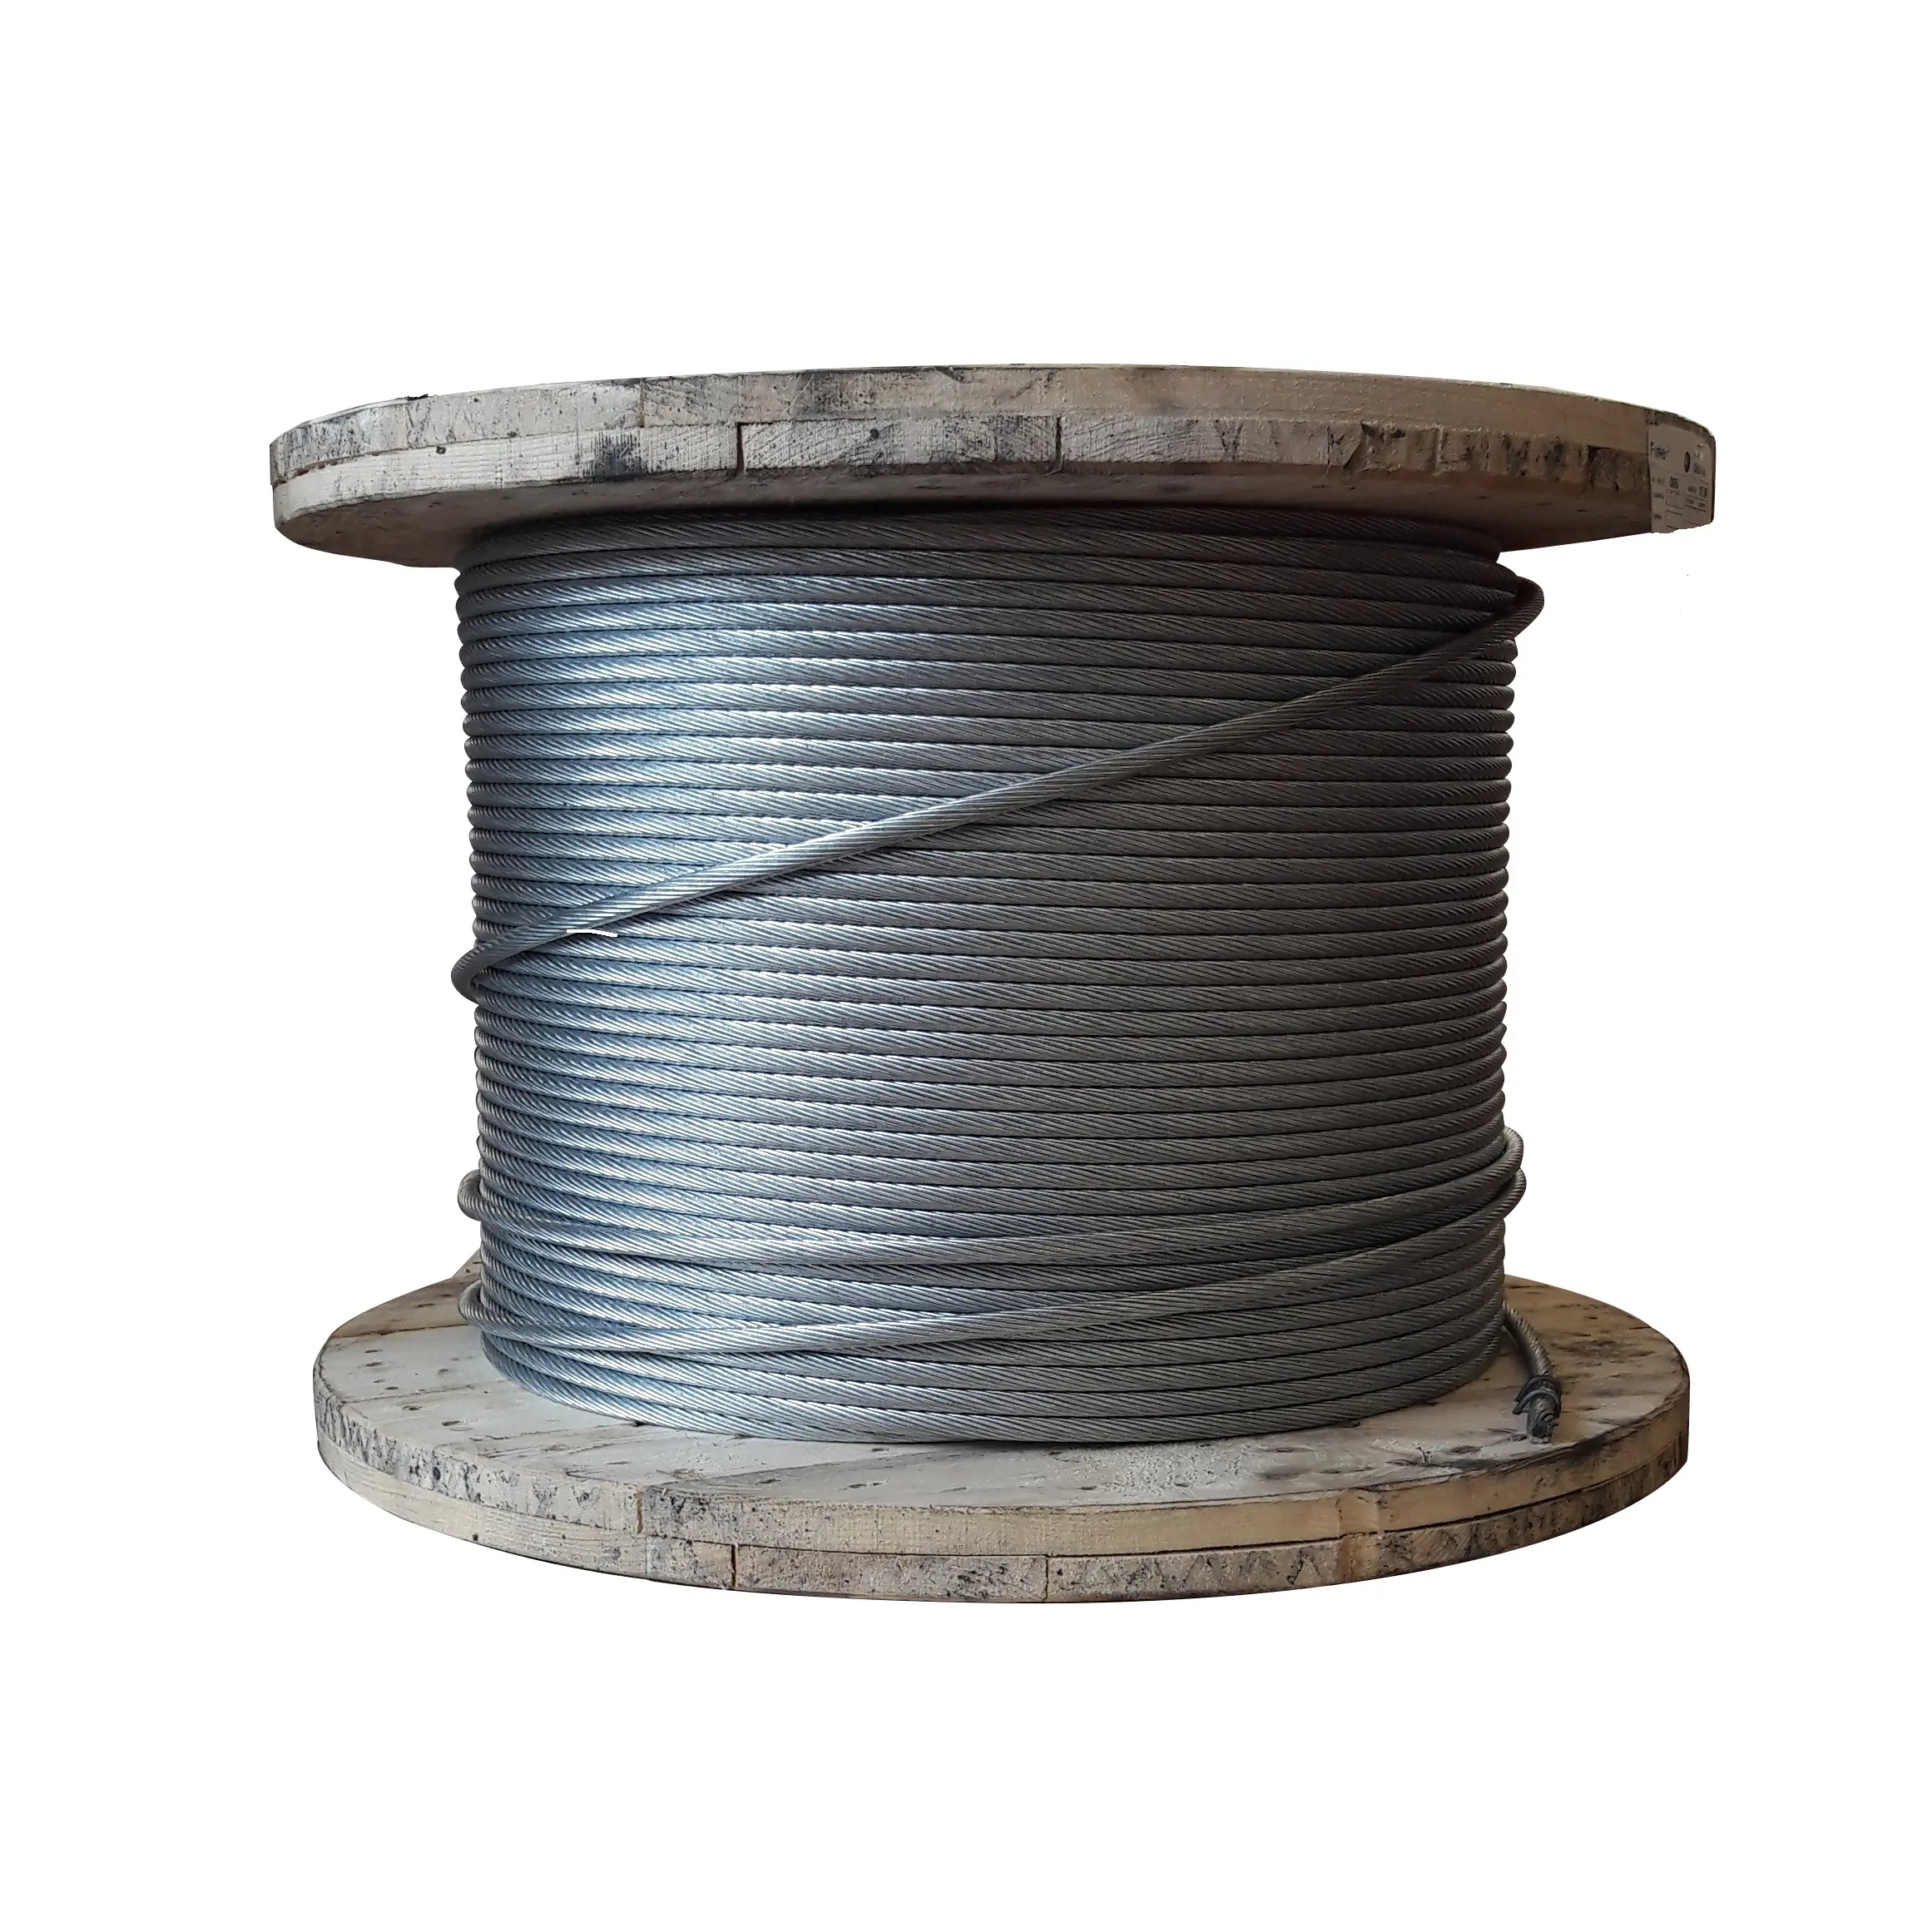 Top quality Made in Italy 1x19 galvanized steel wire ropes for installations in agriculture applications